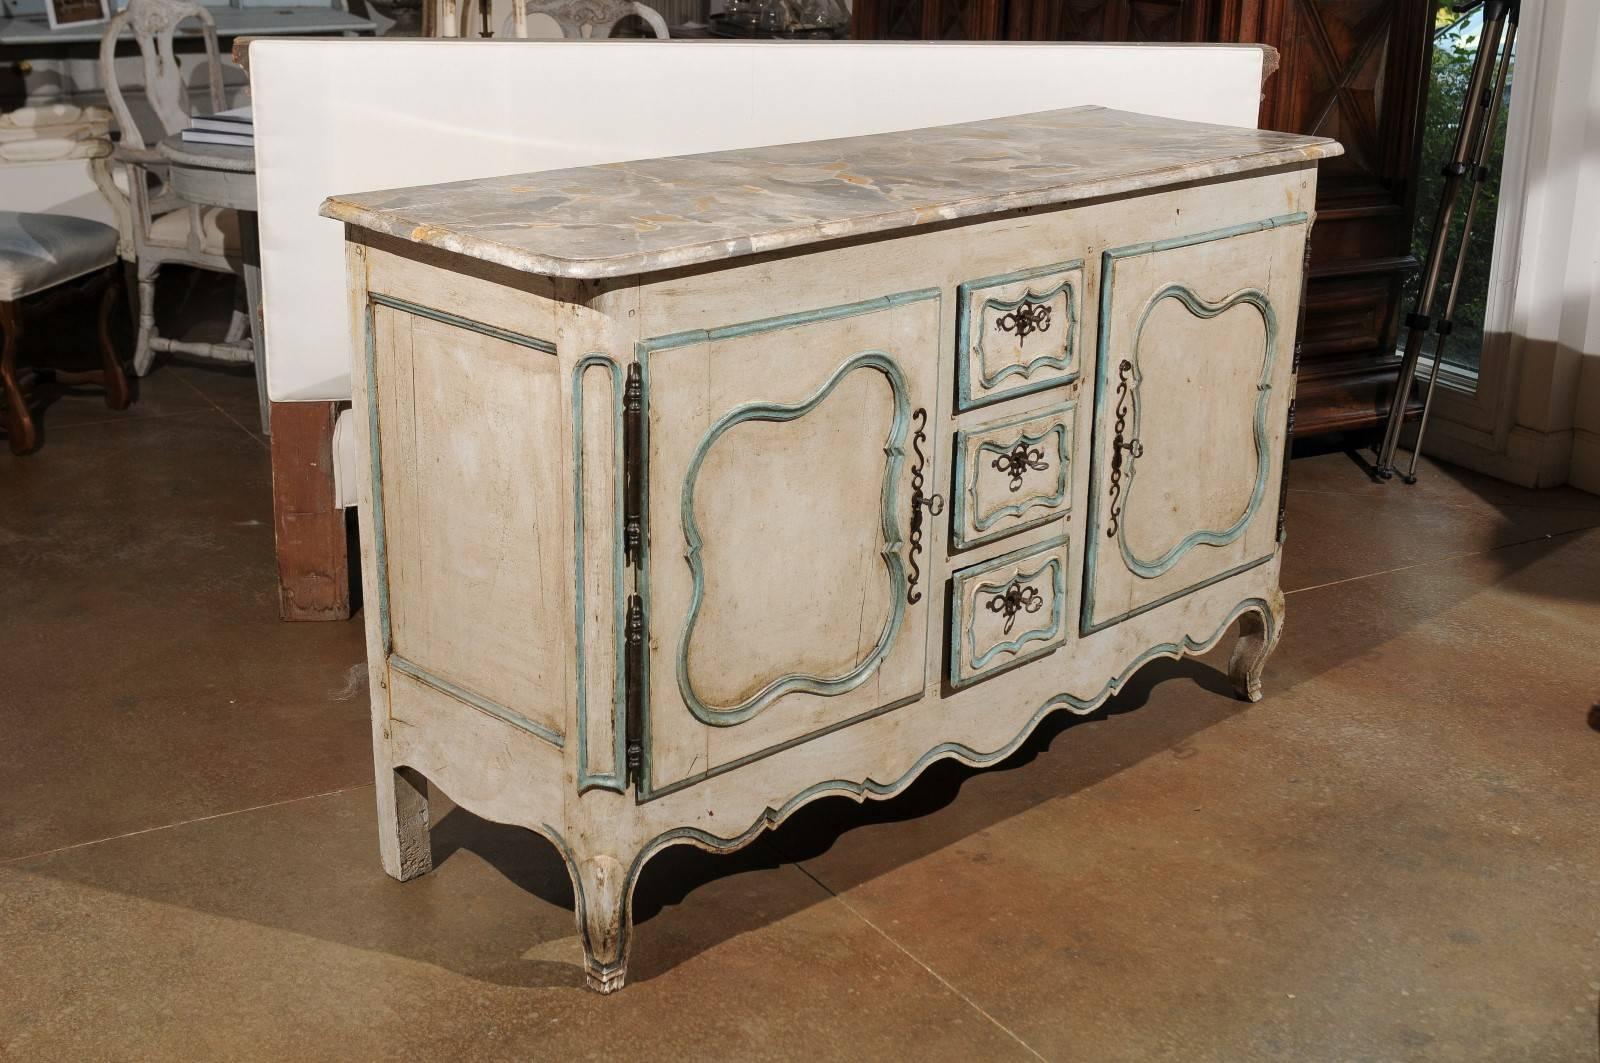 A French Louis XV period painted wood buffet with marbleized top, two doors and three drawers from the mid-18th century. This French buffet features a rectangular faux-marble top with rounded edges overhanging two carved doors flanking three small